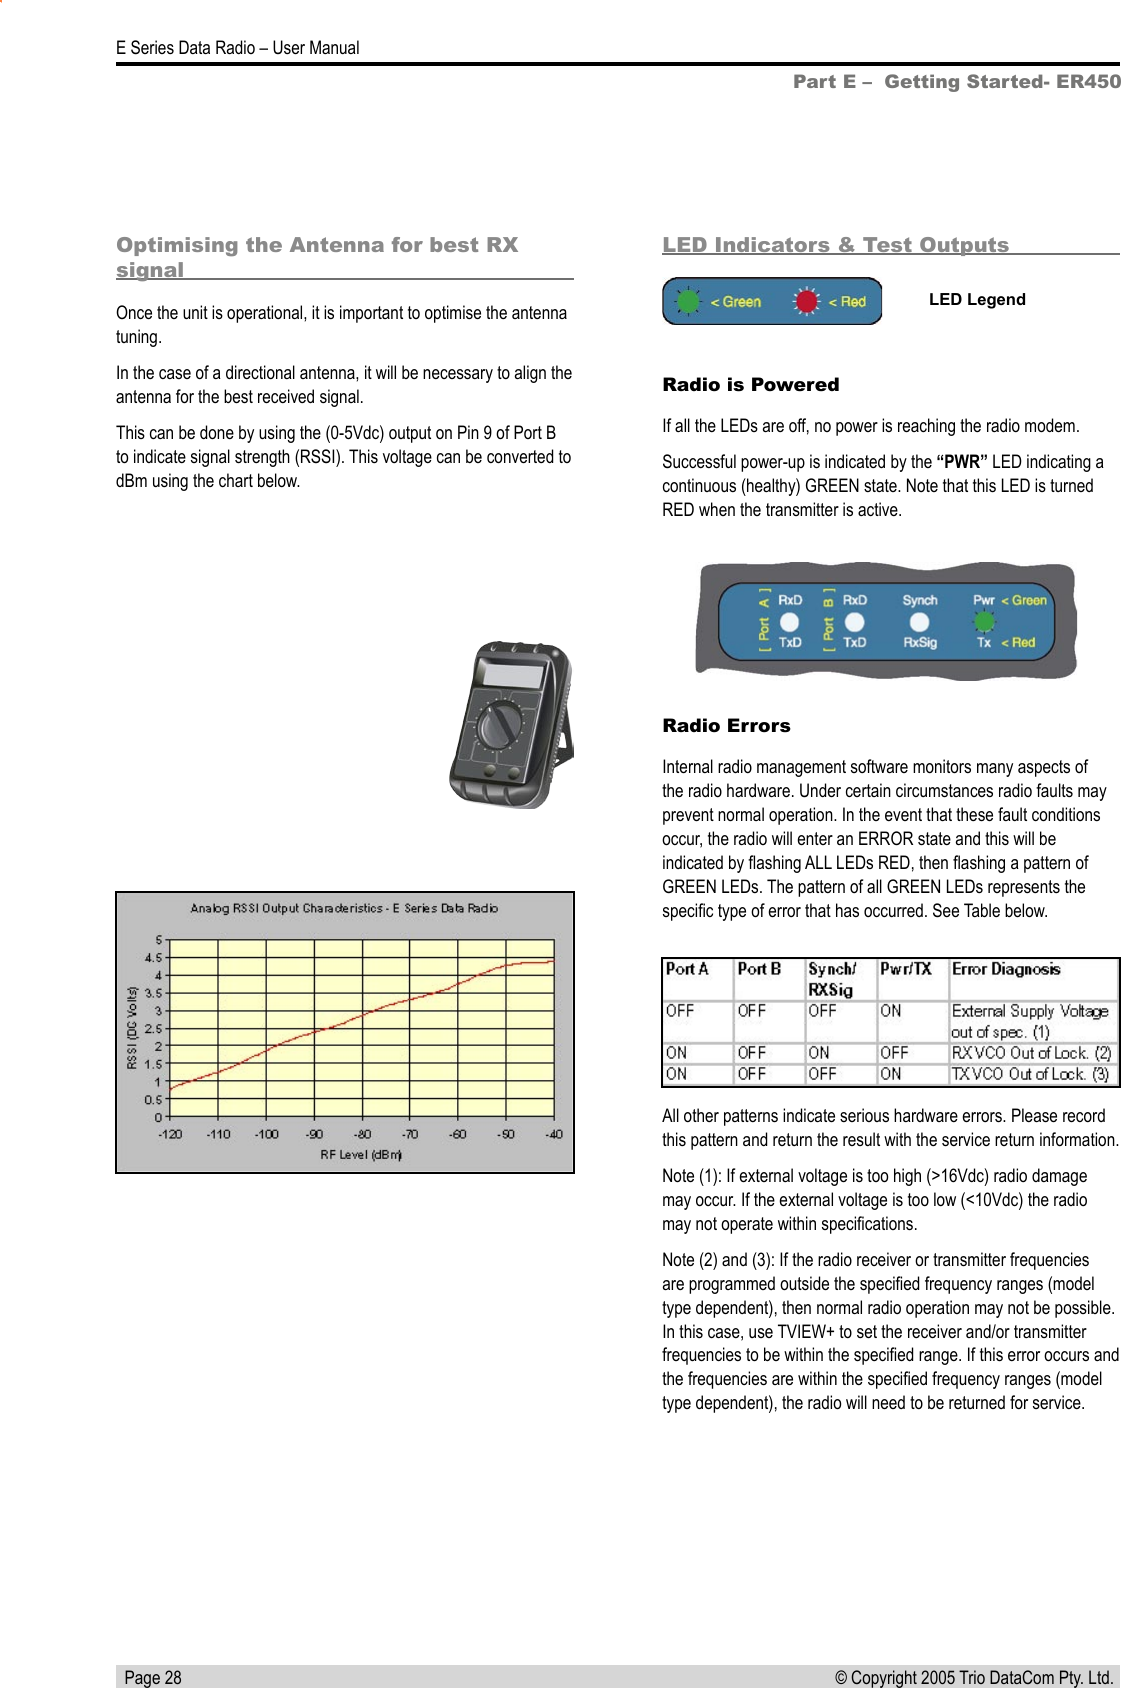   Page 28E Series Data Radio – User Manual© Copyright 2005 Trio DataCom Pty. Ltd. Optimising the Antenna for best RX signalOnce the unit is operational, it is important to optimise the antenna tuning.In the case of a directional antenna, it will be necessary to align the antenna for the best received signal.This can be done by using the (0-5Vdc) output on Pin 9 of Port B to indicate signal strength (RSSI). This voltage can be converted to dBm using the chart below.LED Indicators &amp; Test OutputsRadio is PoweredIf all the LEDs are off, no power is reaching the radio modem.Successful power-up is indicated by the “PWR” LED indicating a continuous (healthy) GREEN state. Note that this LED is turned RED when the transmitter is active.LED LegendPart E –  Getting Started- ER450Radio ErrorsInternal radio management software monitors many aspects of the radio hardware. Under certain circumstances radio faults may prevent normal operation. In the event that these fault conditions occur, the radio will enter an ERROR state and this will be indicated by ﬂashing ALL LEDs RED, then ﬂashing a pattern of GREEN LEDs. The pattern of all GREEN LEDs represents the speciﬁc type of error that has occurred. See Table below.All other patterns indicate serious hardware errors. Please record this pattern and return the result with the service return information.Note (1): If external voltage is too high (&gt;16Vdc) radio damage may occur. If the external voltage is too low (&lt;10Vdc) the radio may not operate within speciﬁcations.Note (2) and (3): If the radio receiver or transmitter frequencies are programmed outside the speciﬁed frequency ranges (model type dependent), then normal radio operation may not be possible. In this case, use TVIEW+ to set the receiver and/or transmitter frequencies to be within the speciﬁed range. If this error occurs and the frequencies are within the speciﬁed frequency ranges (model type dependent), the radio will need to be returned for service.